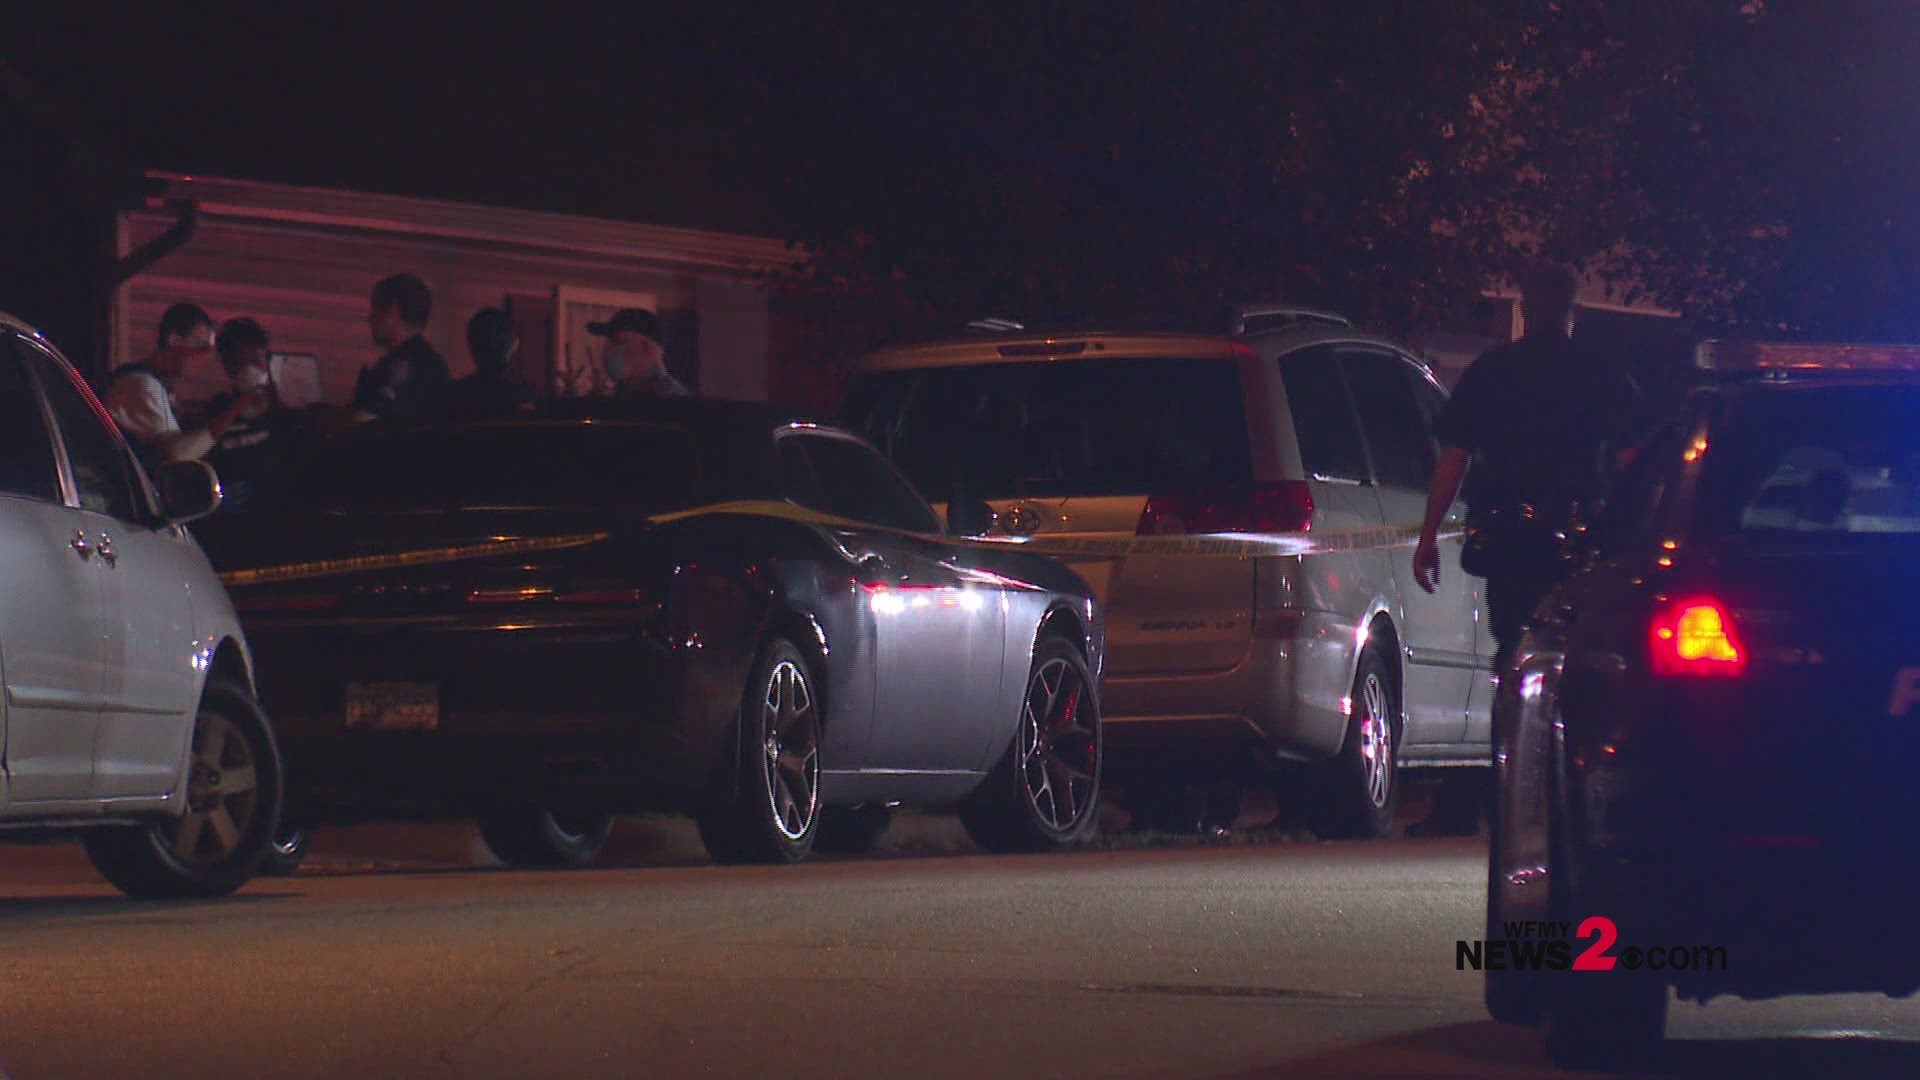 Greensboro police responded to a shooting on Kay Street around 9:30 p.m. Tuesday. They found Terrence Rahvon Black, 29, shot. Police said he later died.